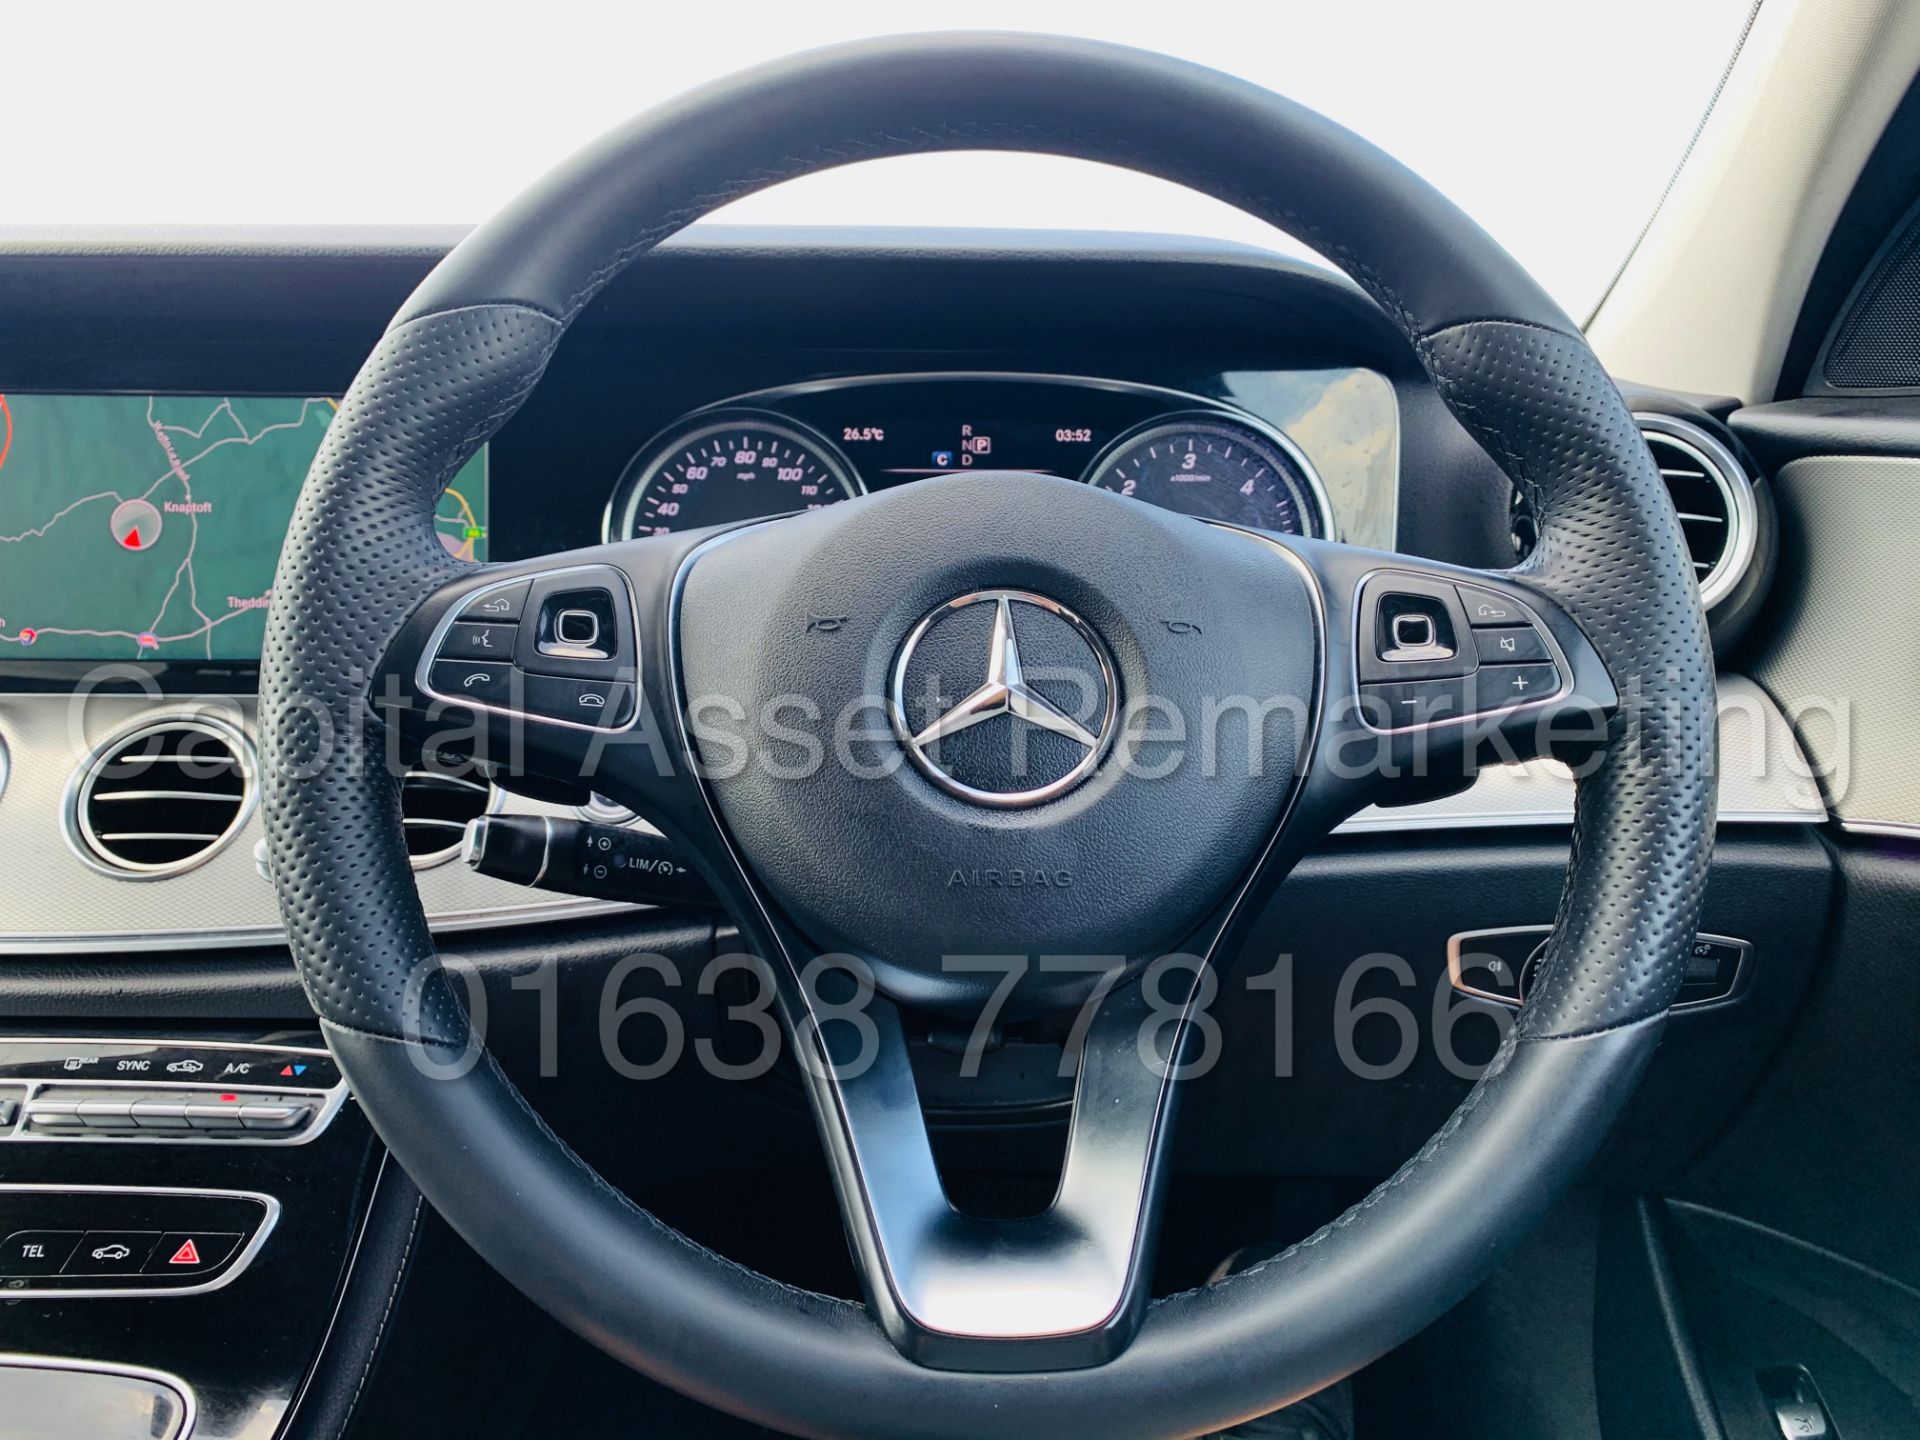 (On Sale) MERCEDES-BENZ E220d *SALOON* (2018 - NEW MODEL) '9G TRONIC AUTO - LEATHER - SAT NAV' - Image 48 of 50